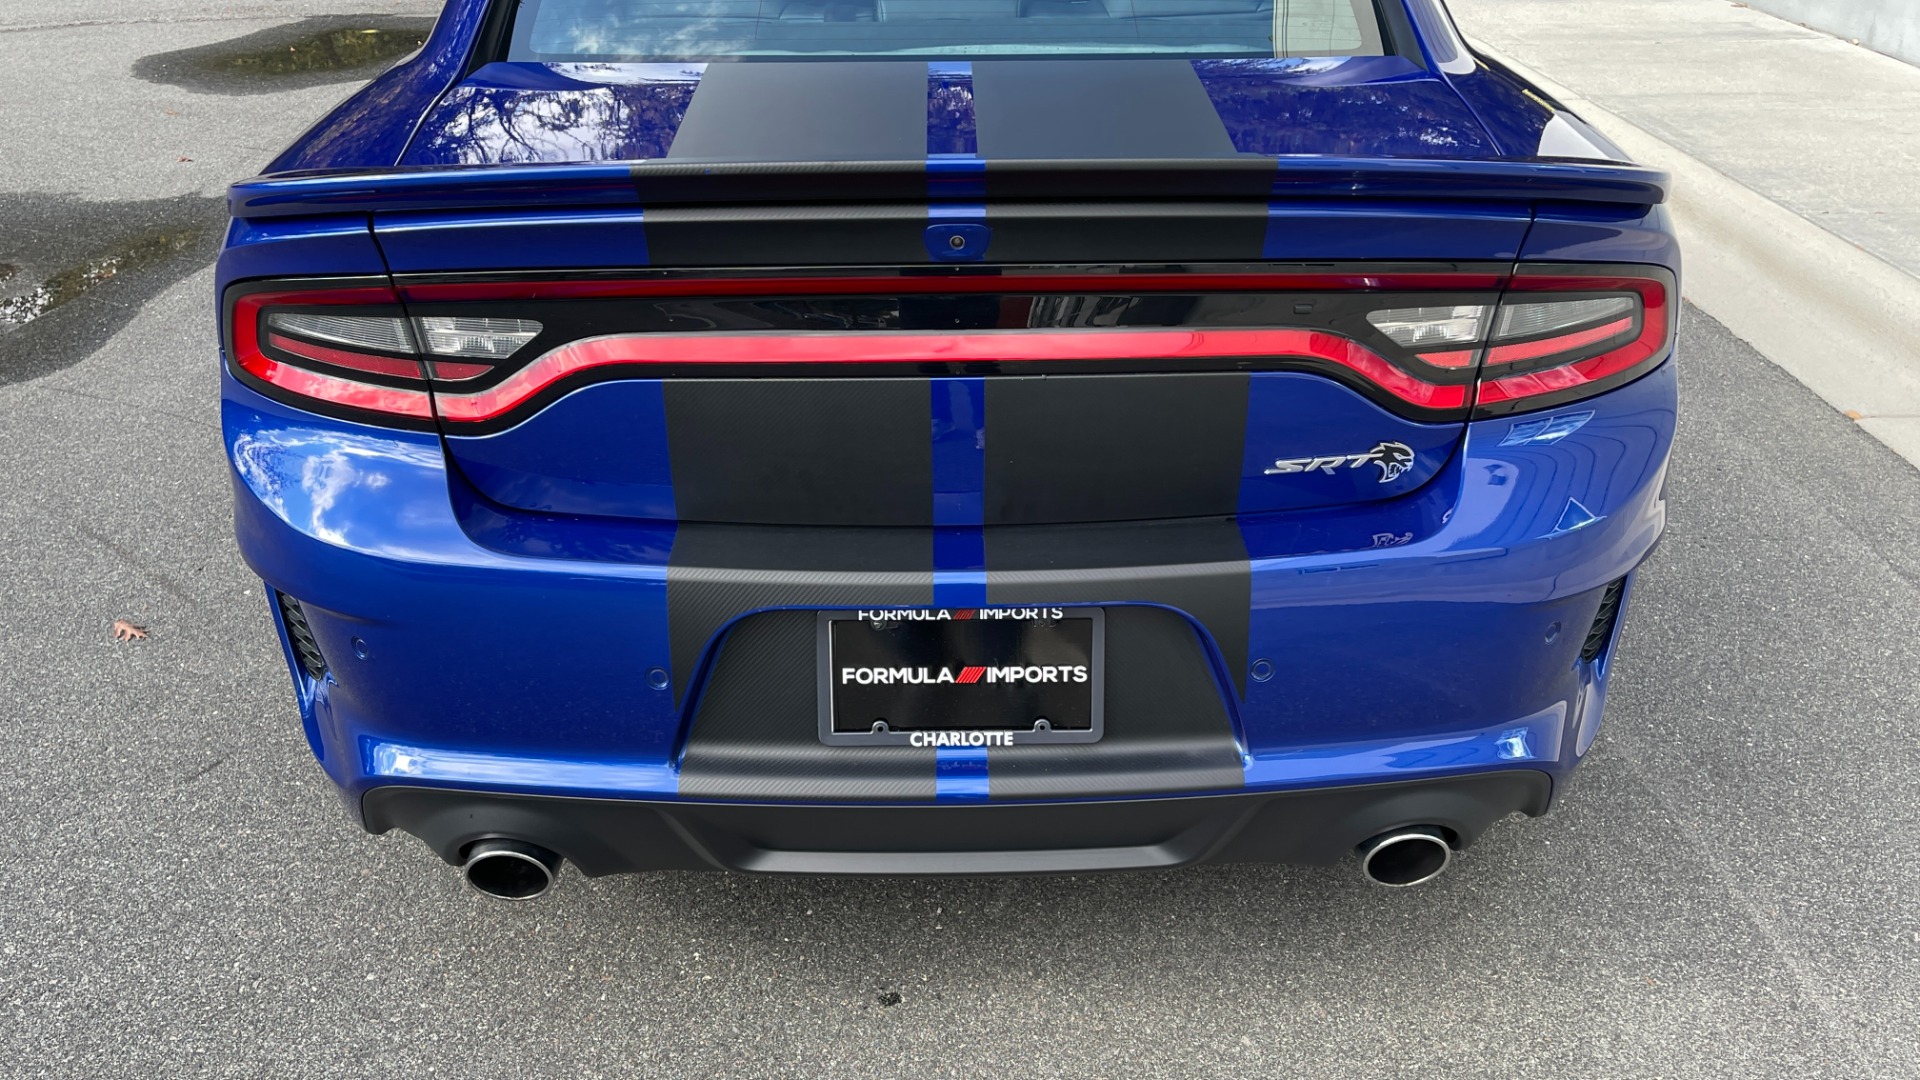 Used 2021 Dodge Charger SRT HELLCAT WIDEBODY / RED KEYS / CARBON STRIPES / 717HP / BREMBO BRAKES for sale $82,995 at Formula Imports in Charlotte NC 28227 12